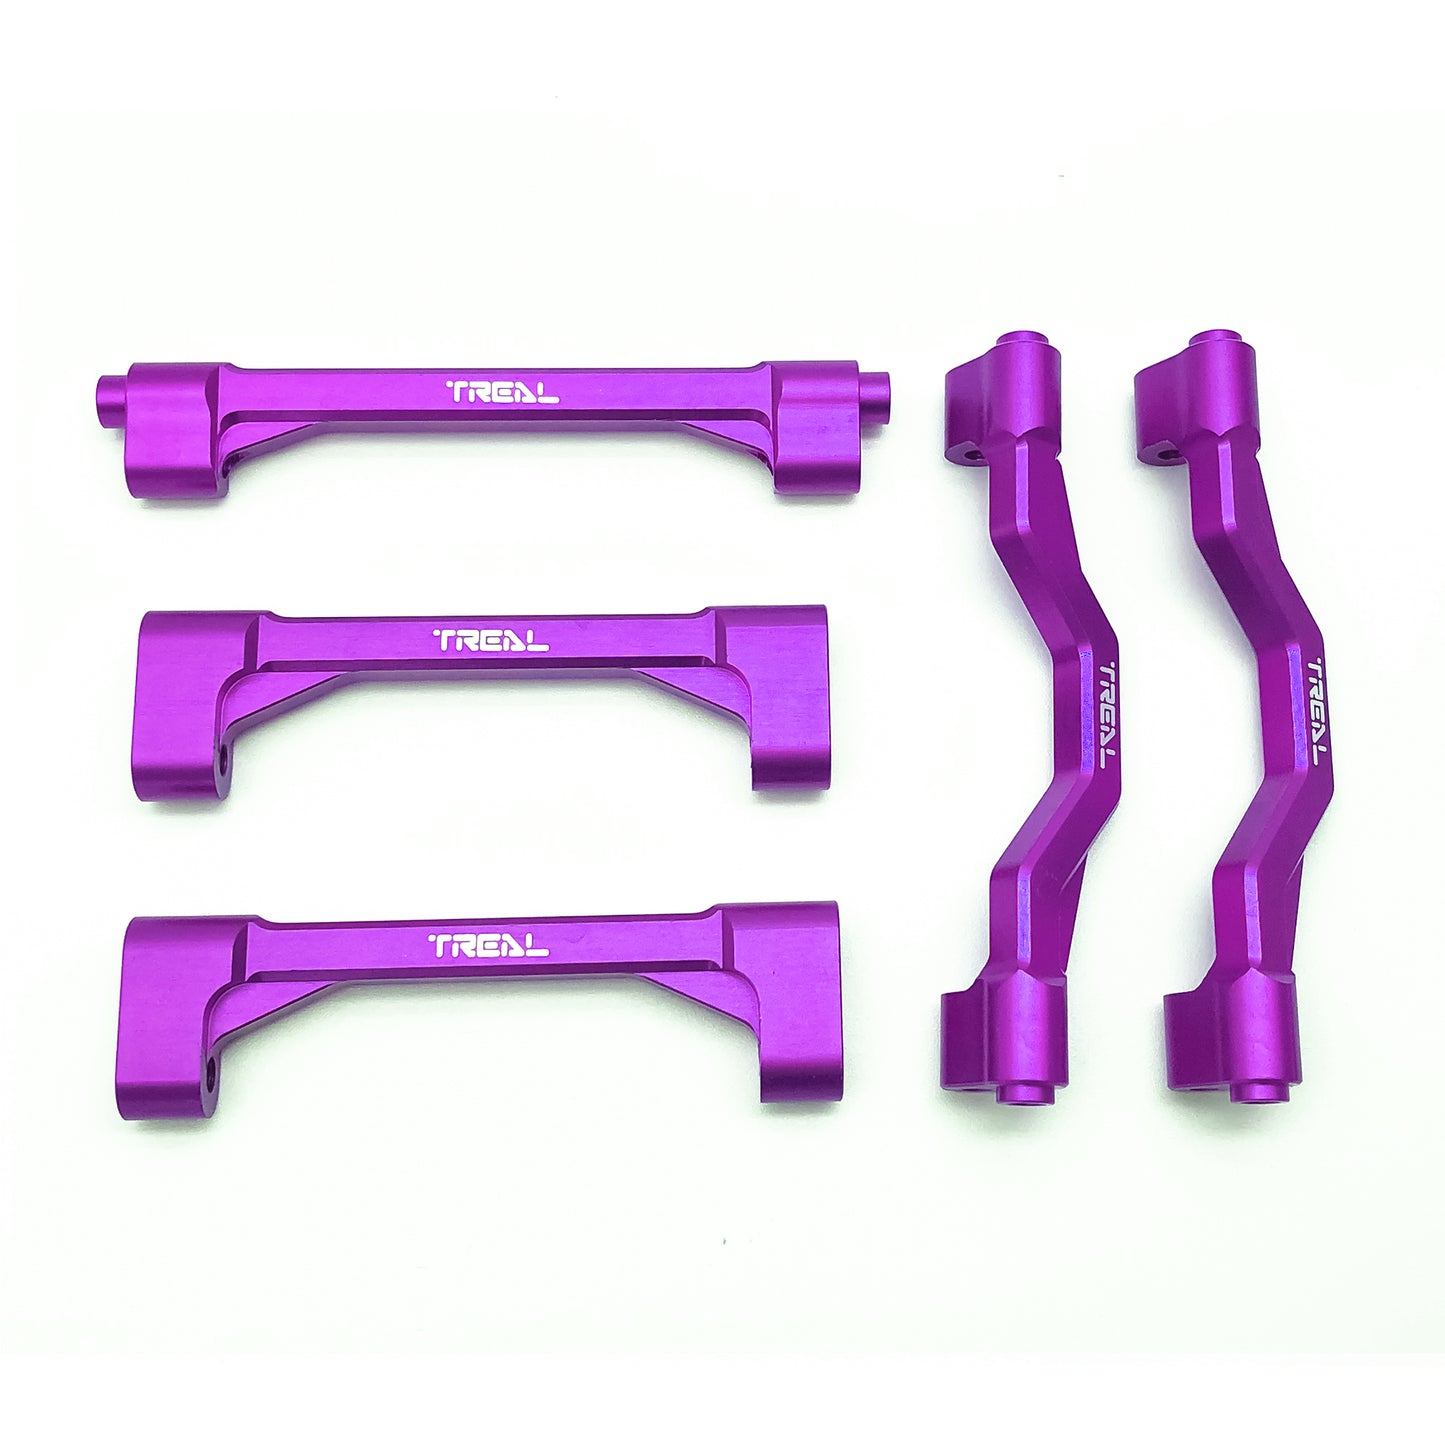 Treal Aluminum 7075 Chassis Cross Brace Set(5) for Losi LMT